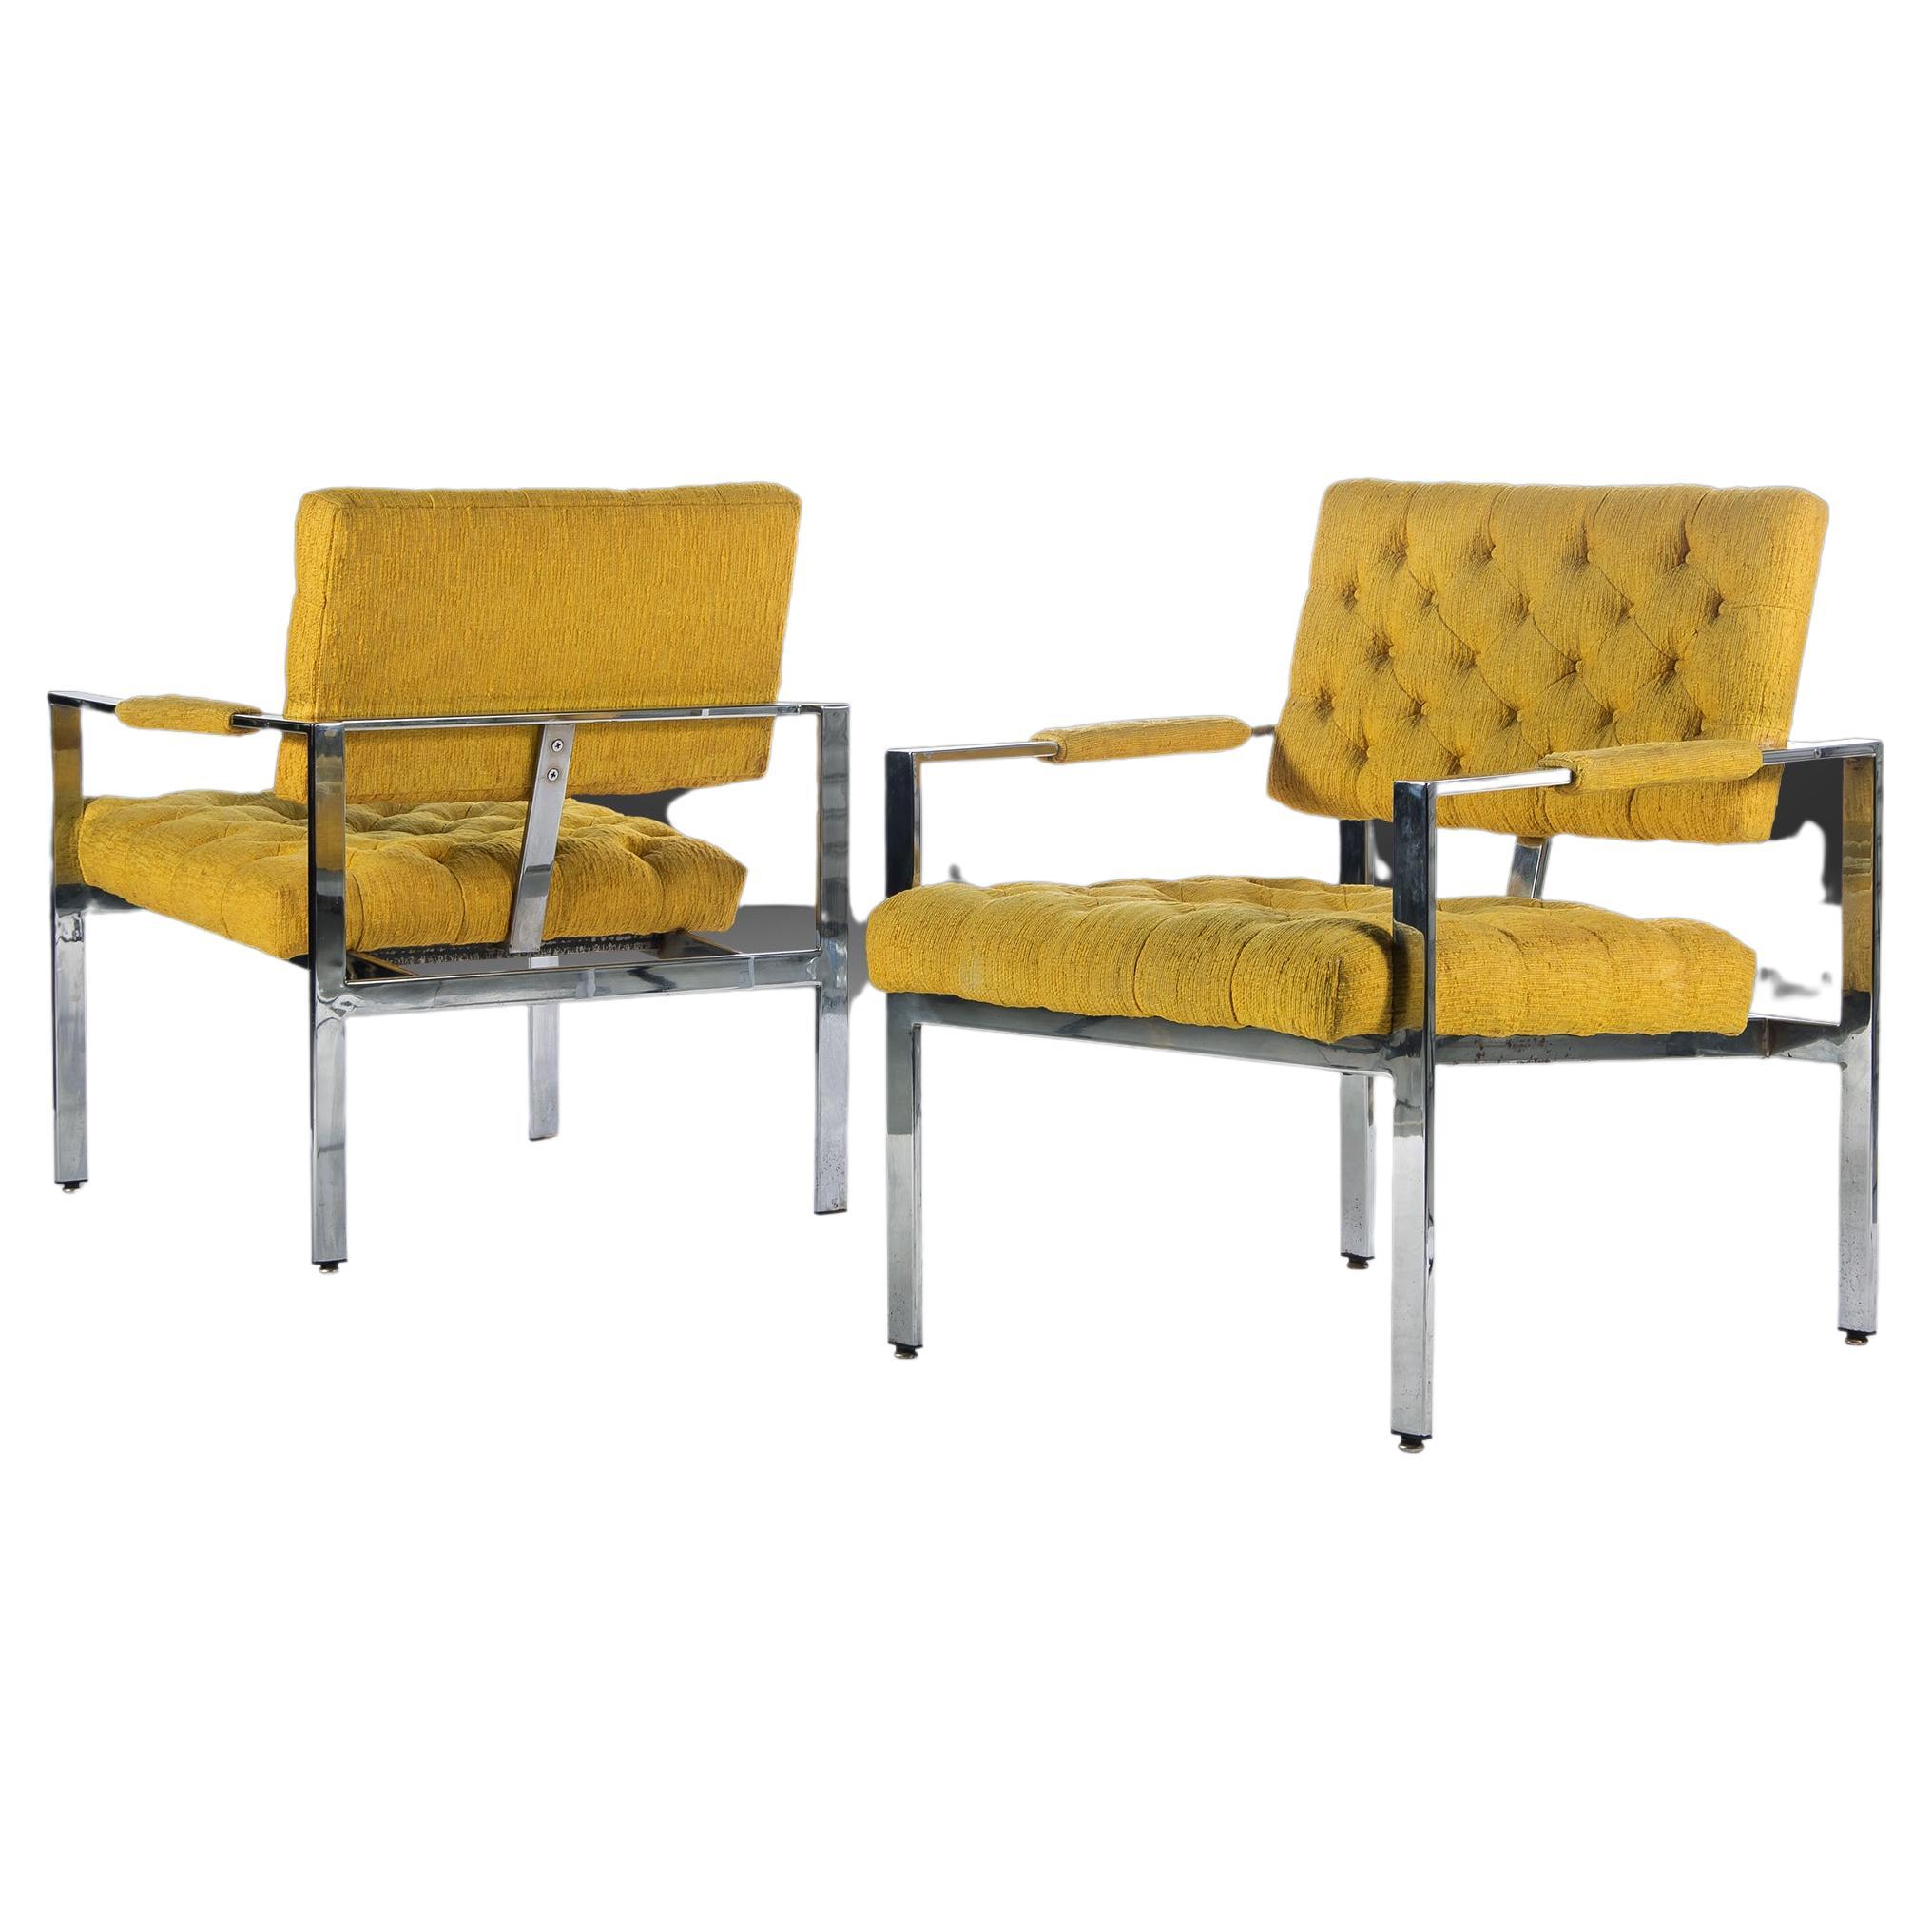 Pair of Chrome Lounge Chairs by Milo Baughman for Thayer Coggin, USA, c. 1970's For Sale